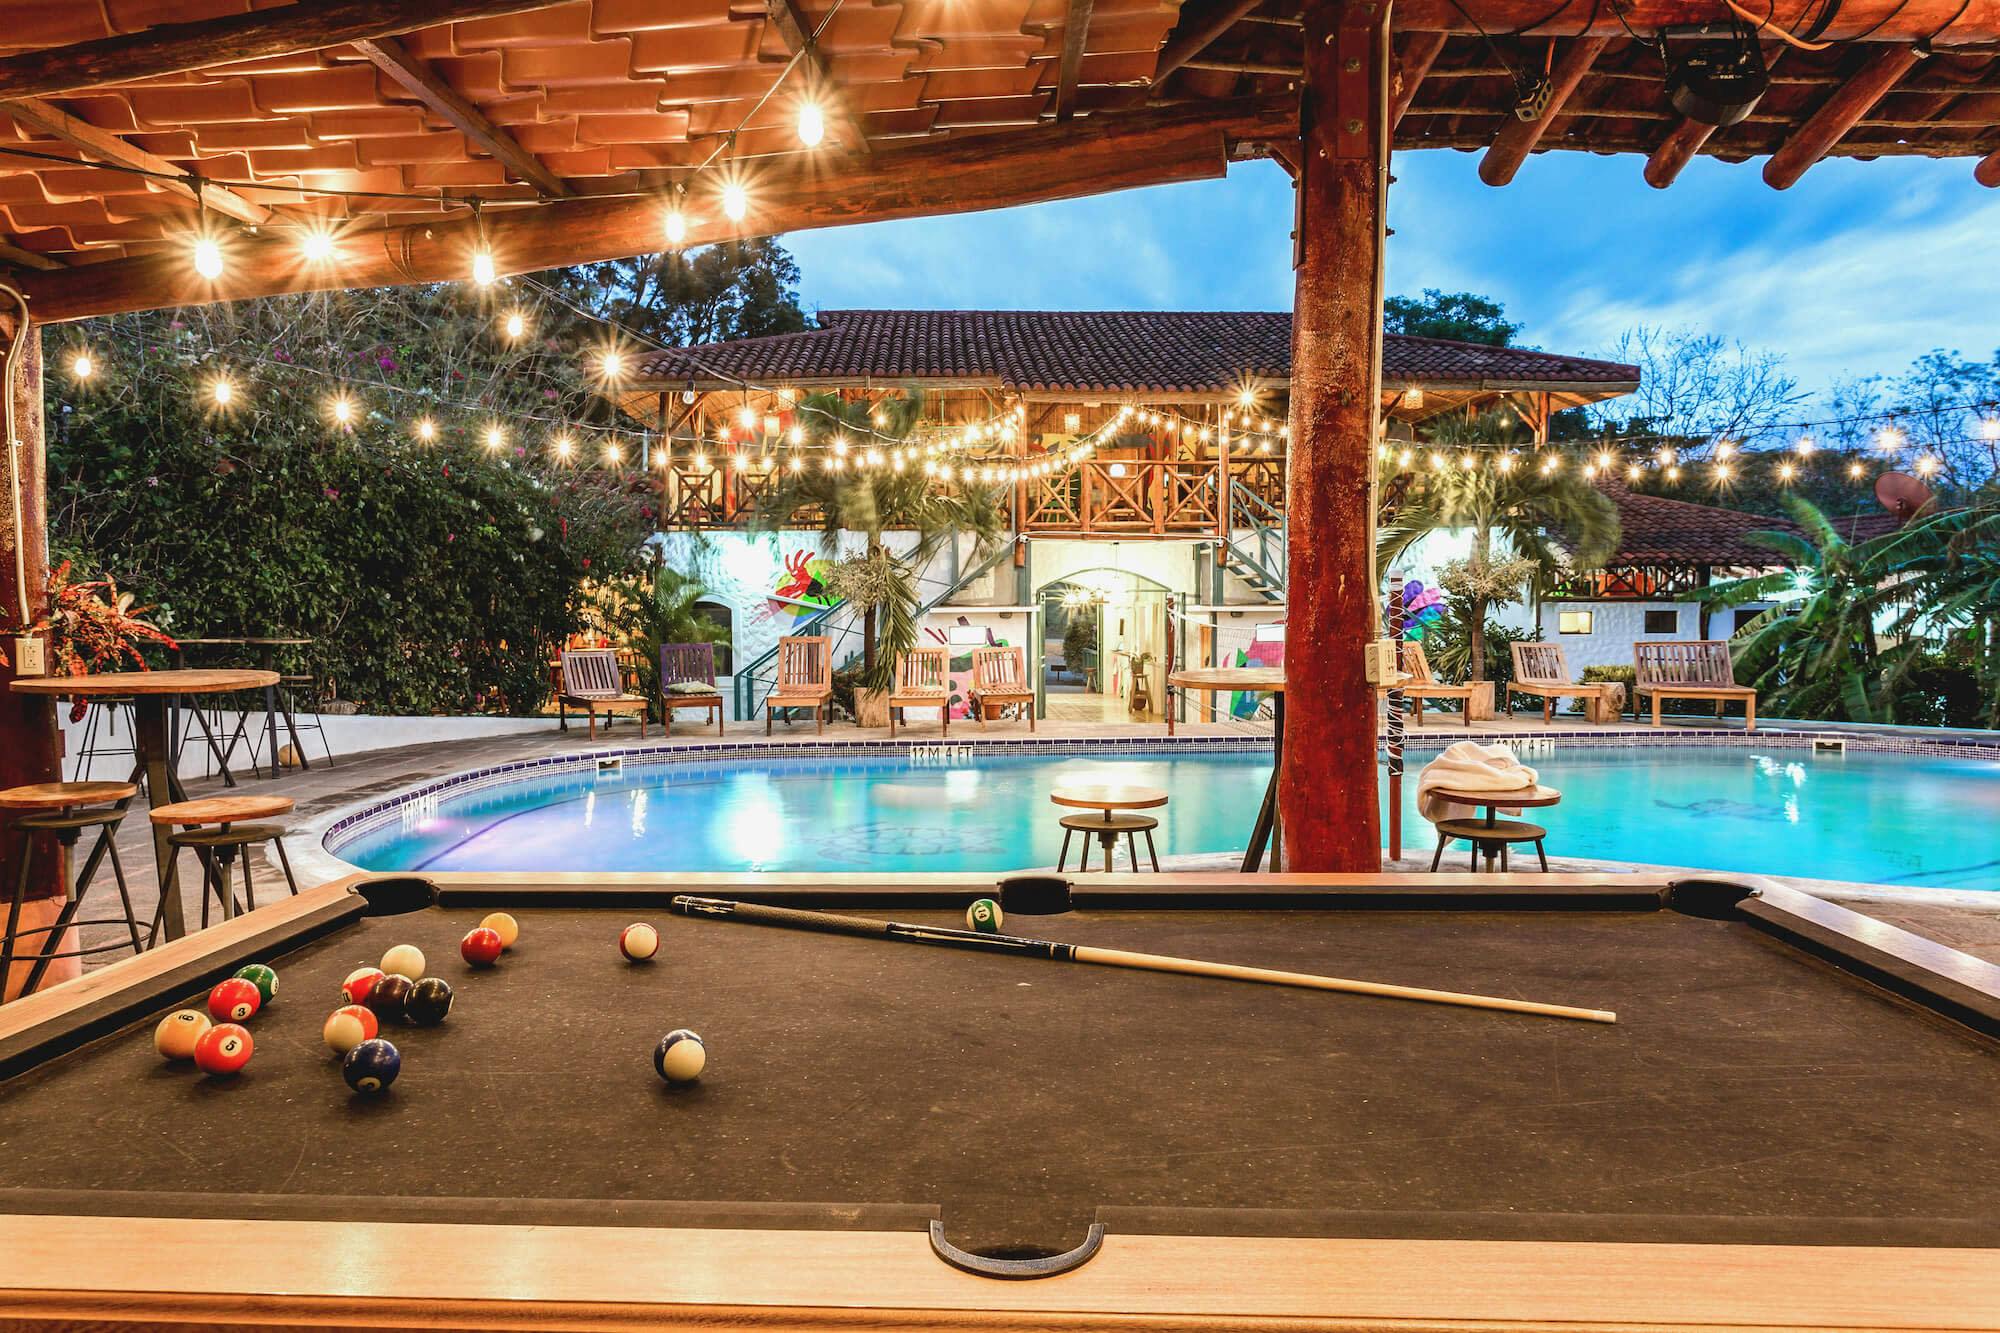 pool table next to outdoor pool